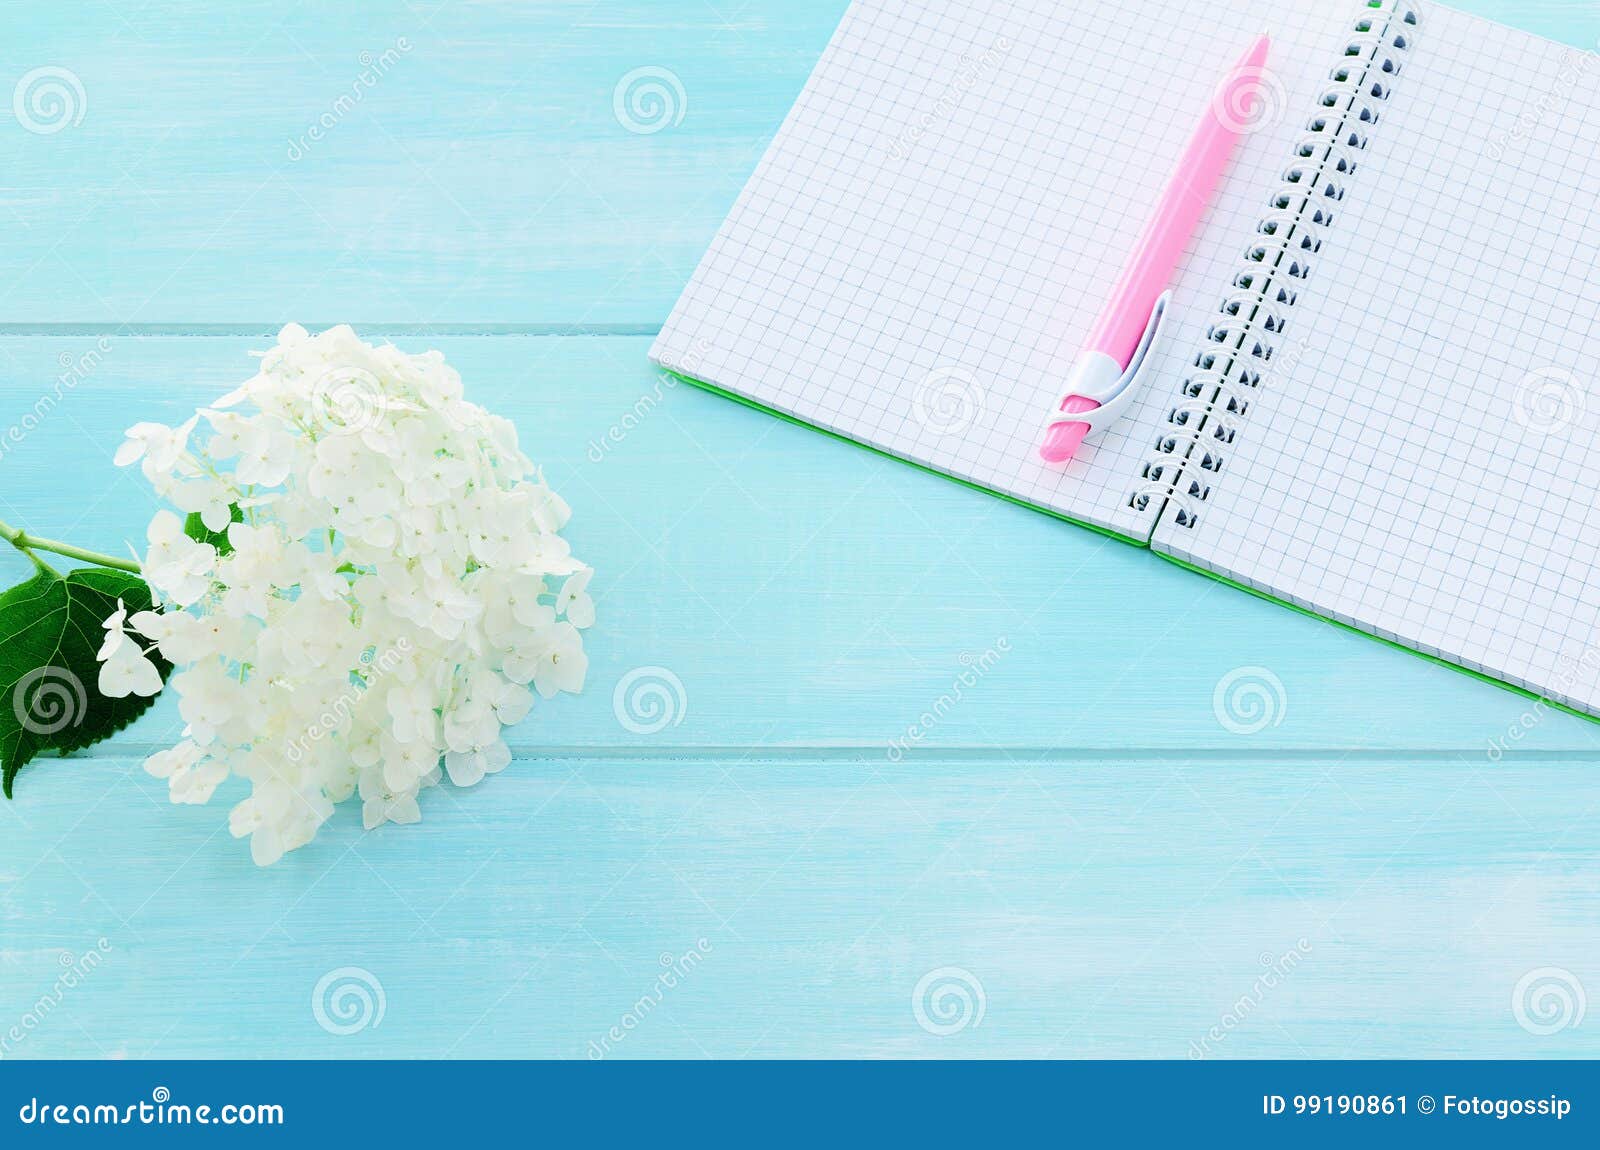 open notebook with pink pen, coffeecup and hydrangea